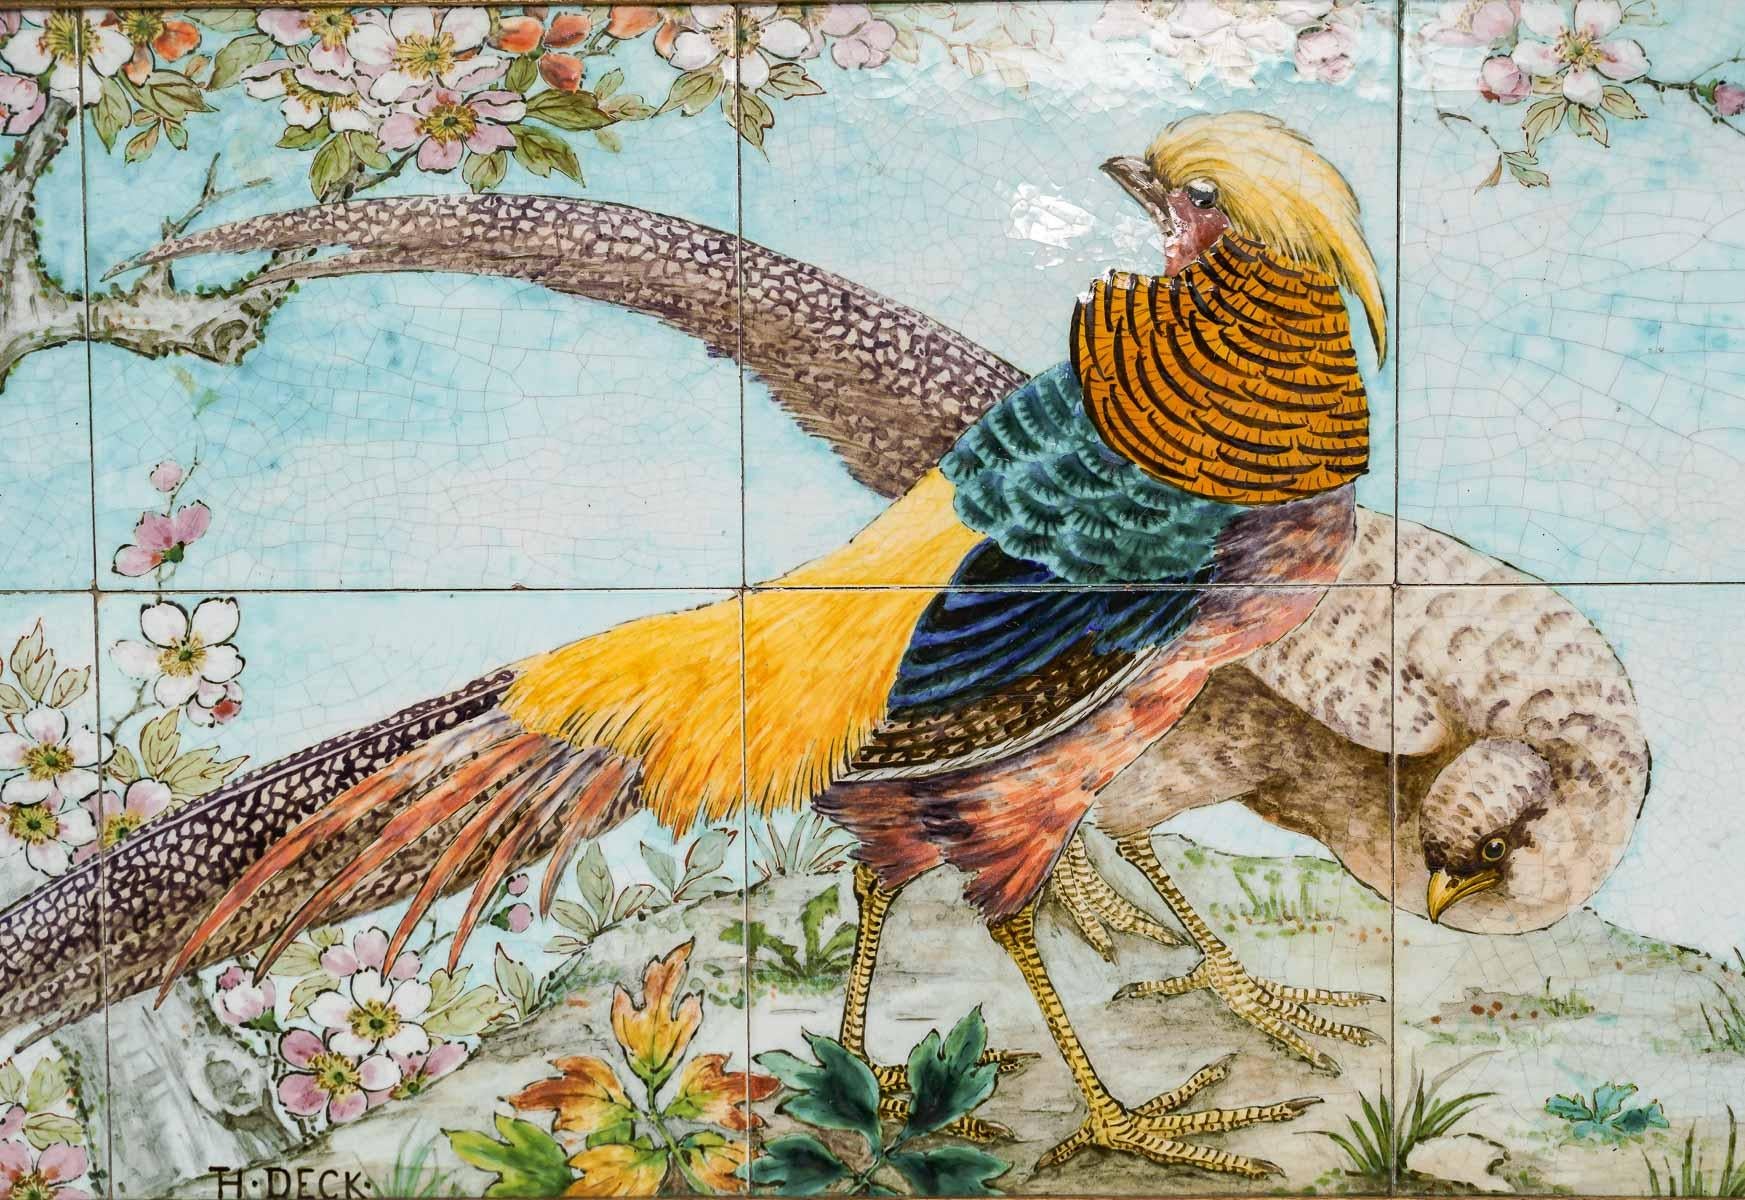 A Théodore Deck (1823-1891) Faience Paneled Fourteen-Tile Rectangular Wall Plaque

Polychromic Earthenware very finely hand-painted, designed with a couple of pheasants among vegetation, daisies and poppies, a flying swallow symbolizing